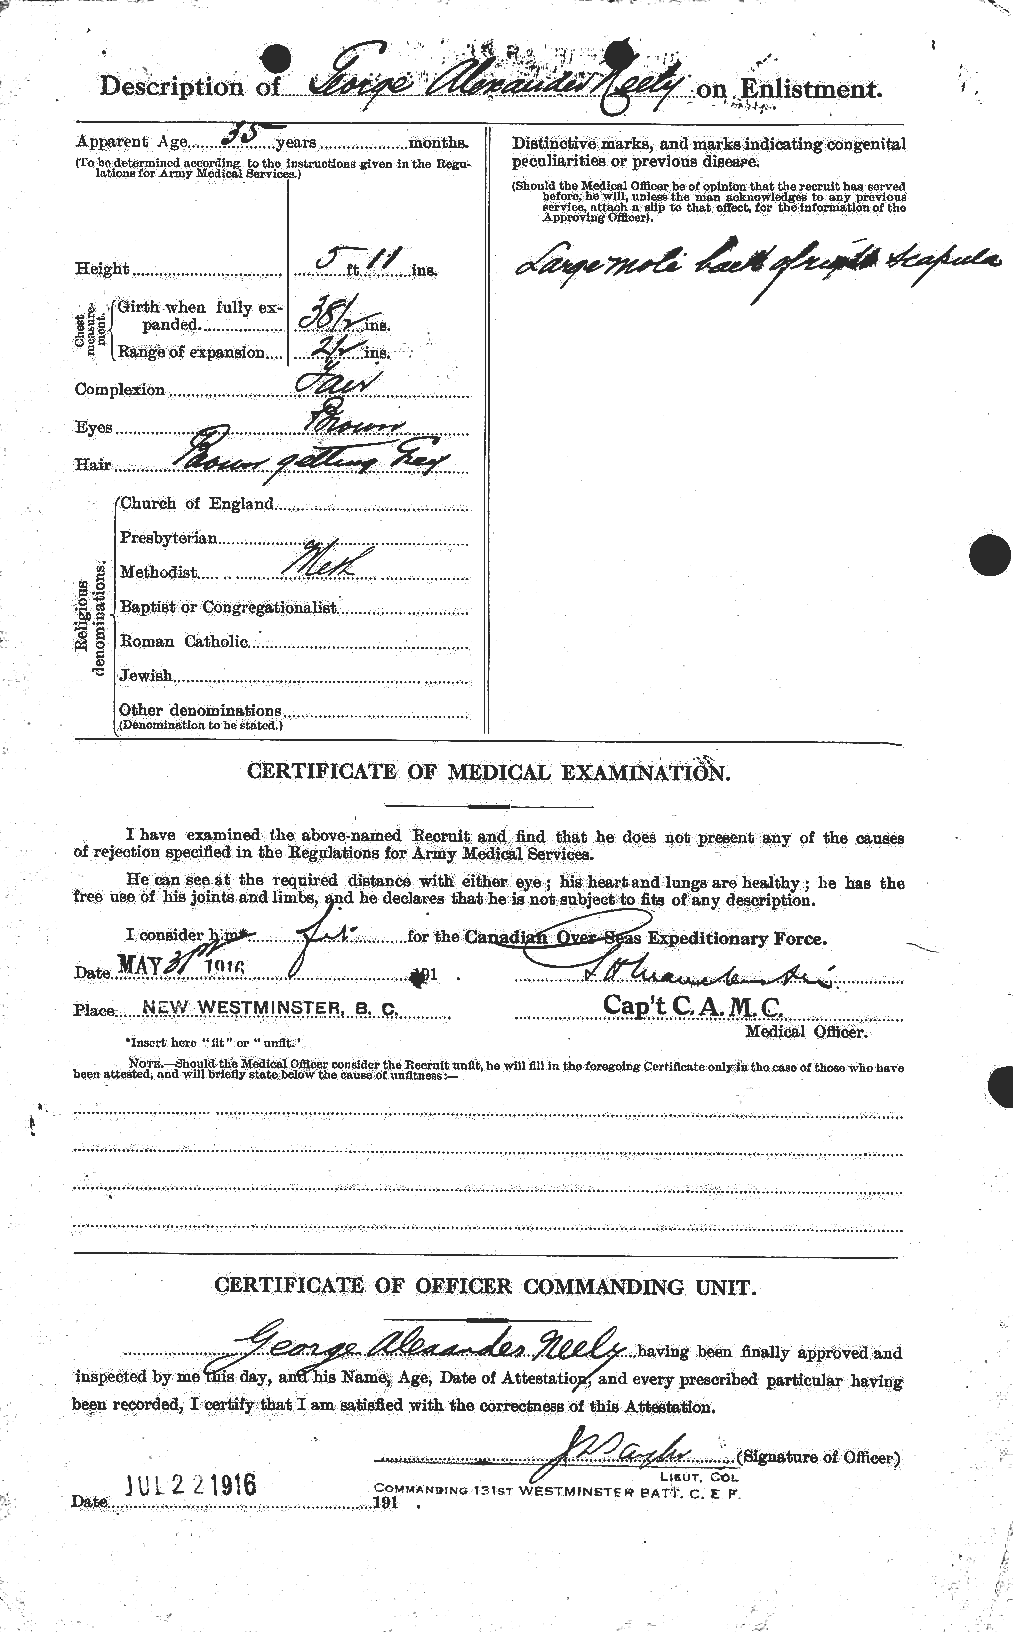 Attestation record: George Alexander Neely